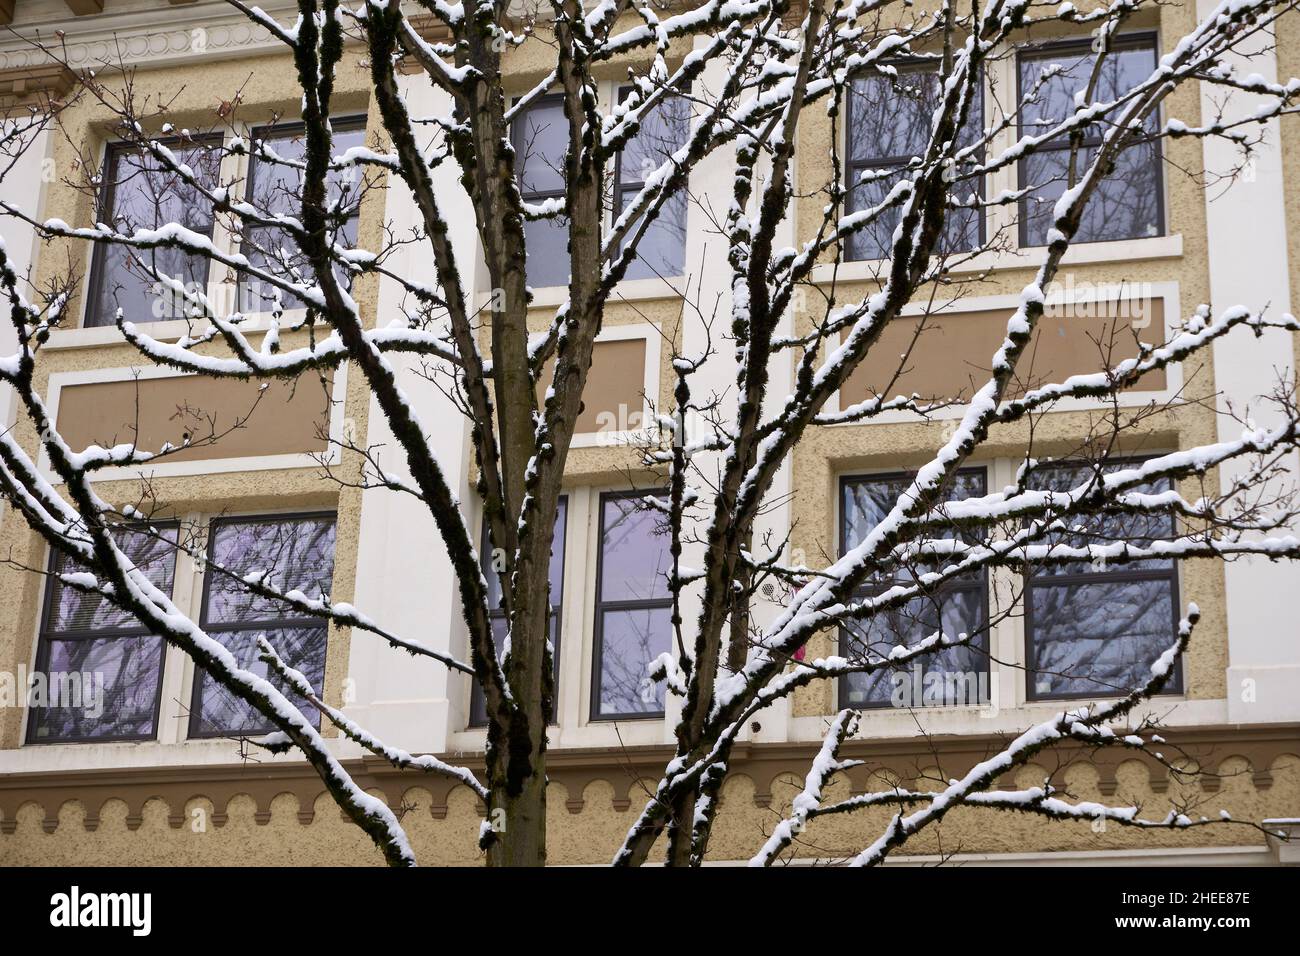 Snow covered tree branches with old building in background Stock Photo